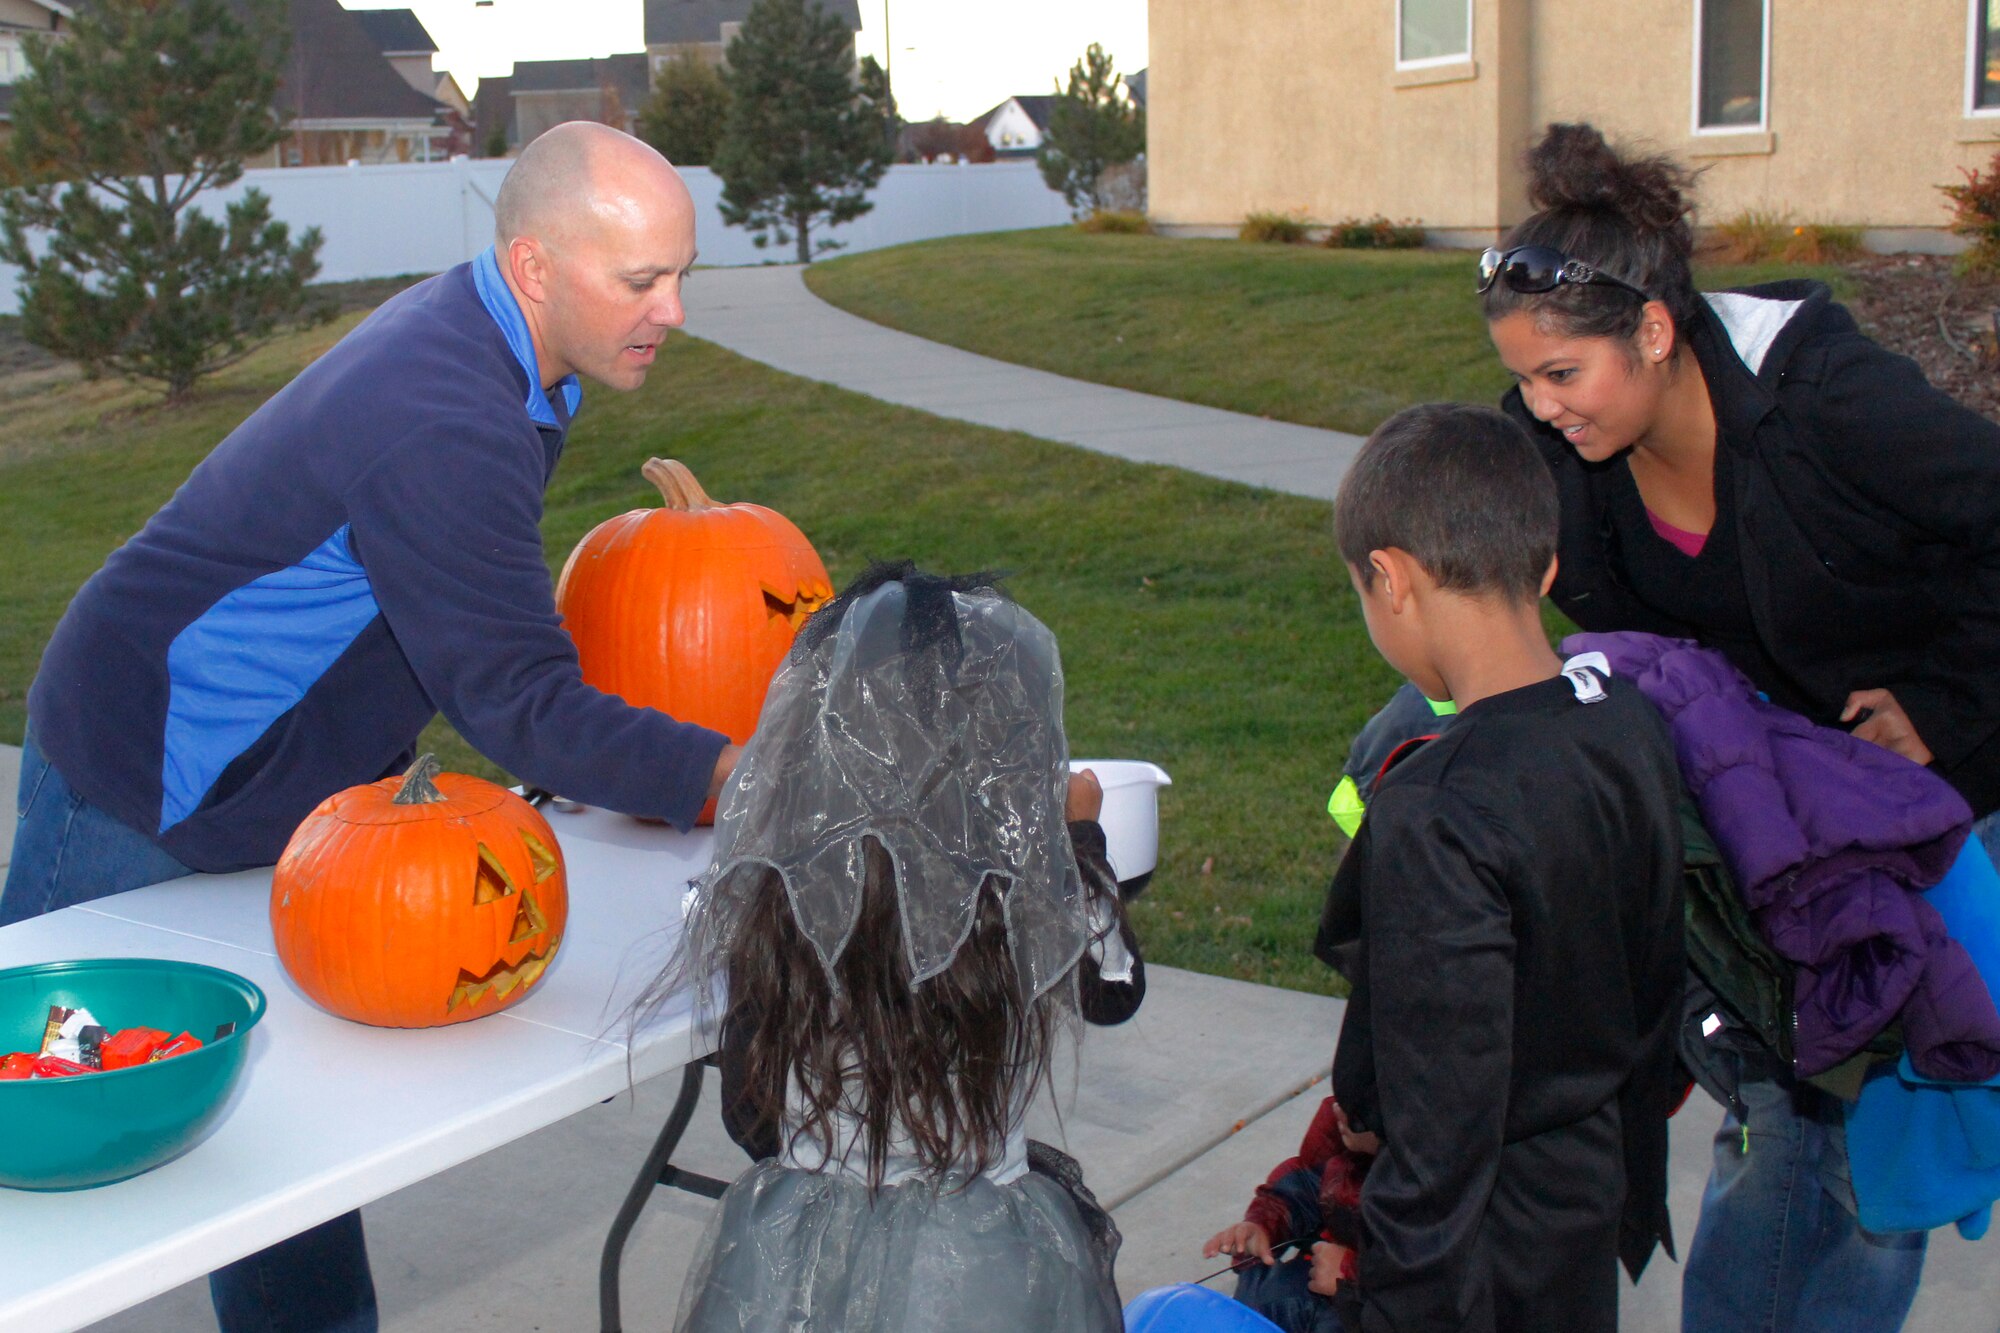 Col. Scott Romberger, 460th Space Wing vice commander, gives out candy to children in base housing Oct. 31, 2015, on Buckley Air Force Base, Colo. Children in base housing walked the neighborhood in costumes and received candy and treats from neighbors. (U.S. Air Force photo by Staff Sgt. Darren Scott/Released)